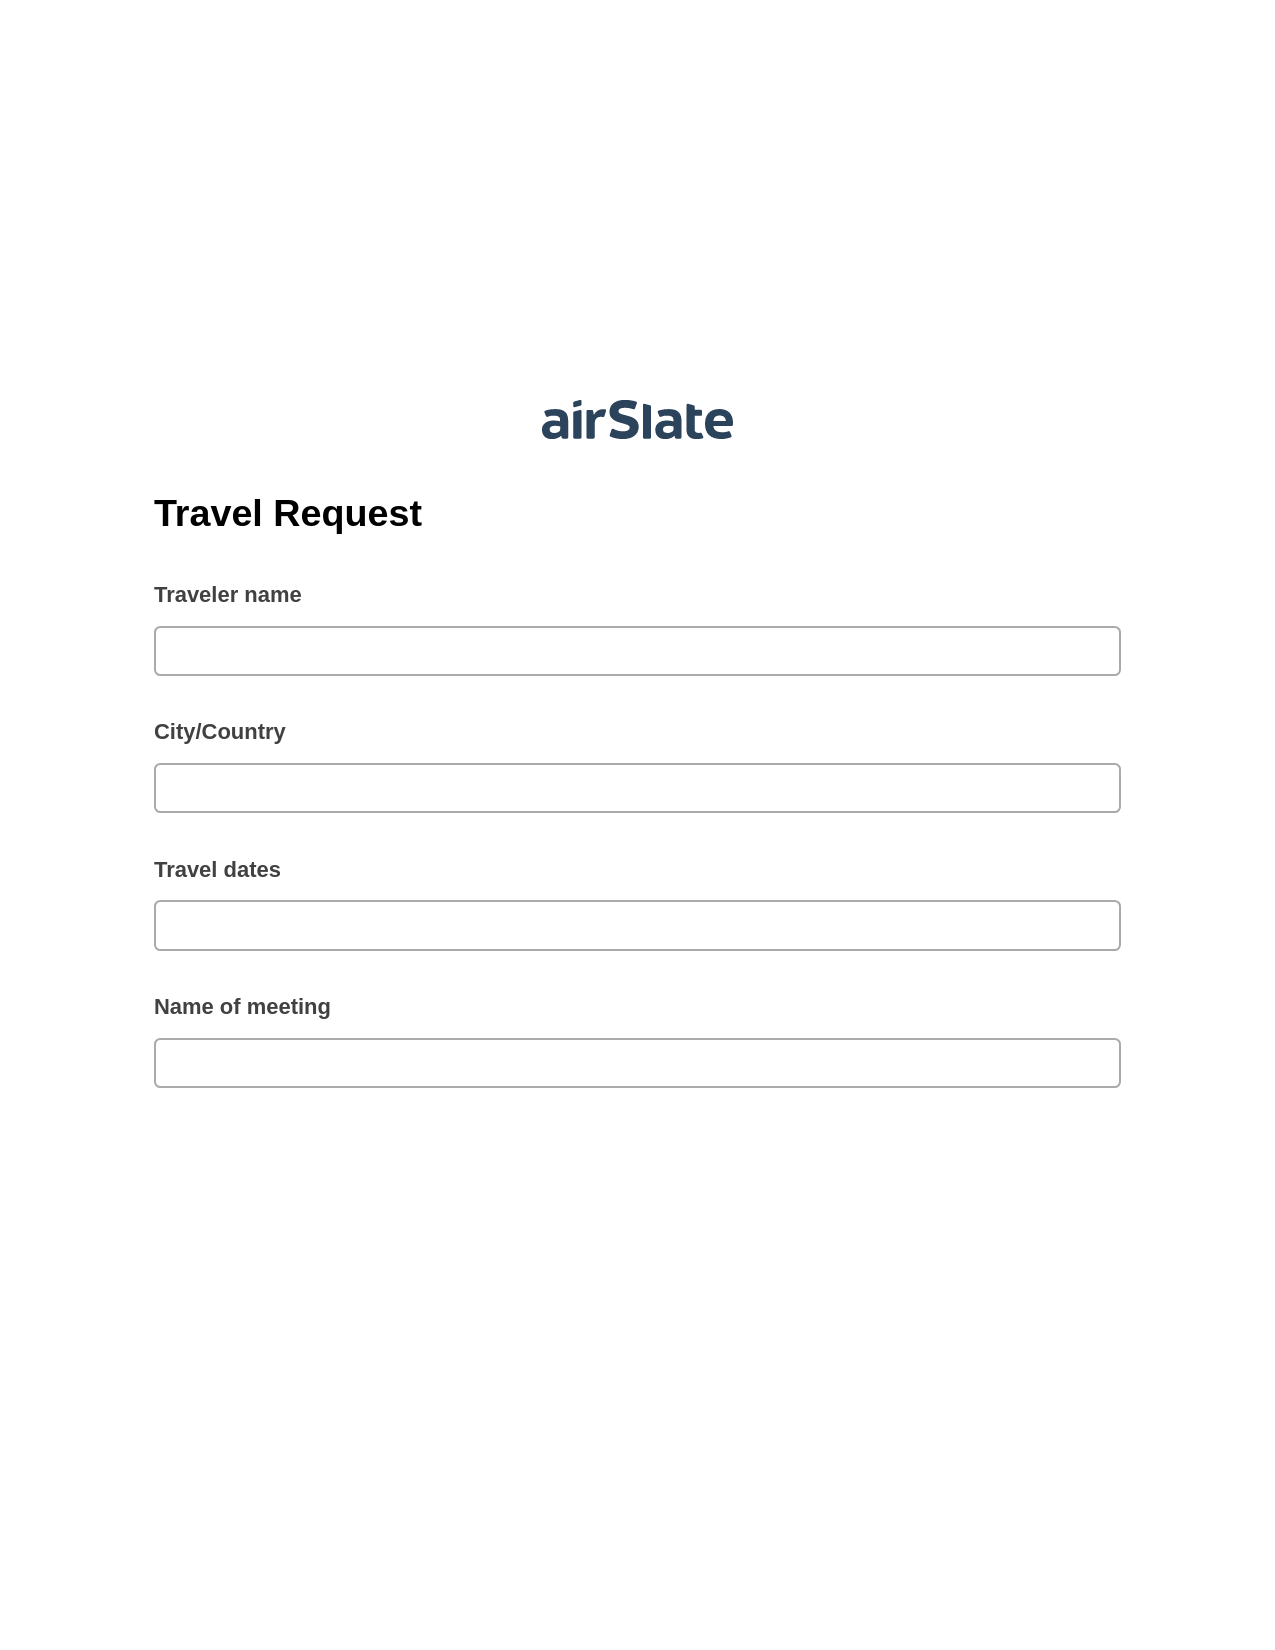 Travel Request Pre-fill Document Bot, Pre-fill with Custom Data Bot, Archive to SharePoint Folder Bot